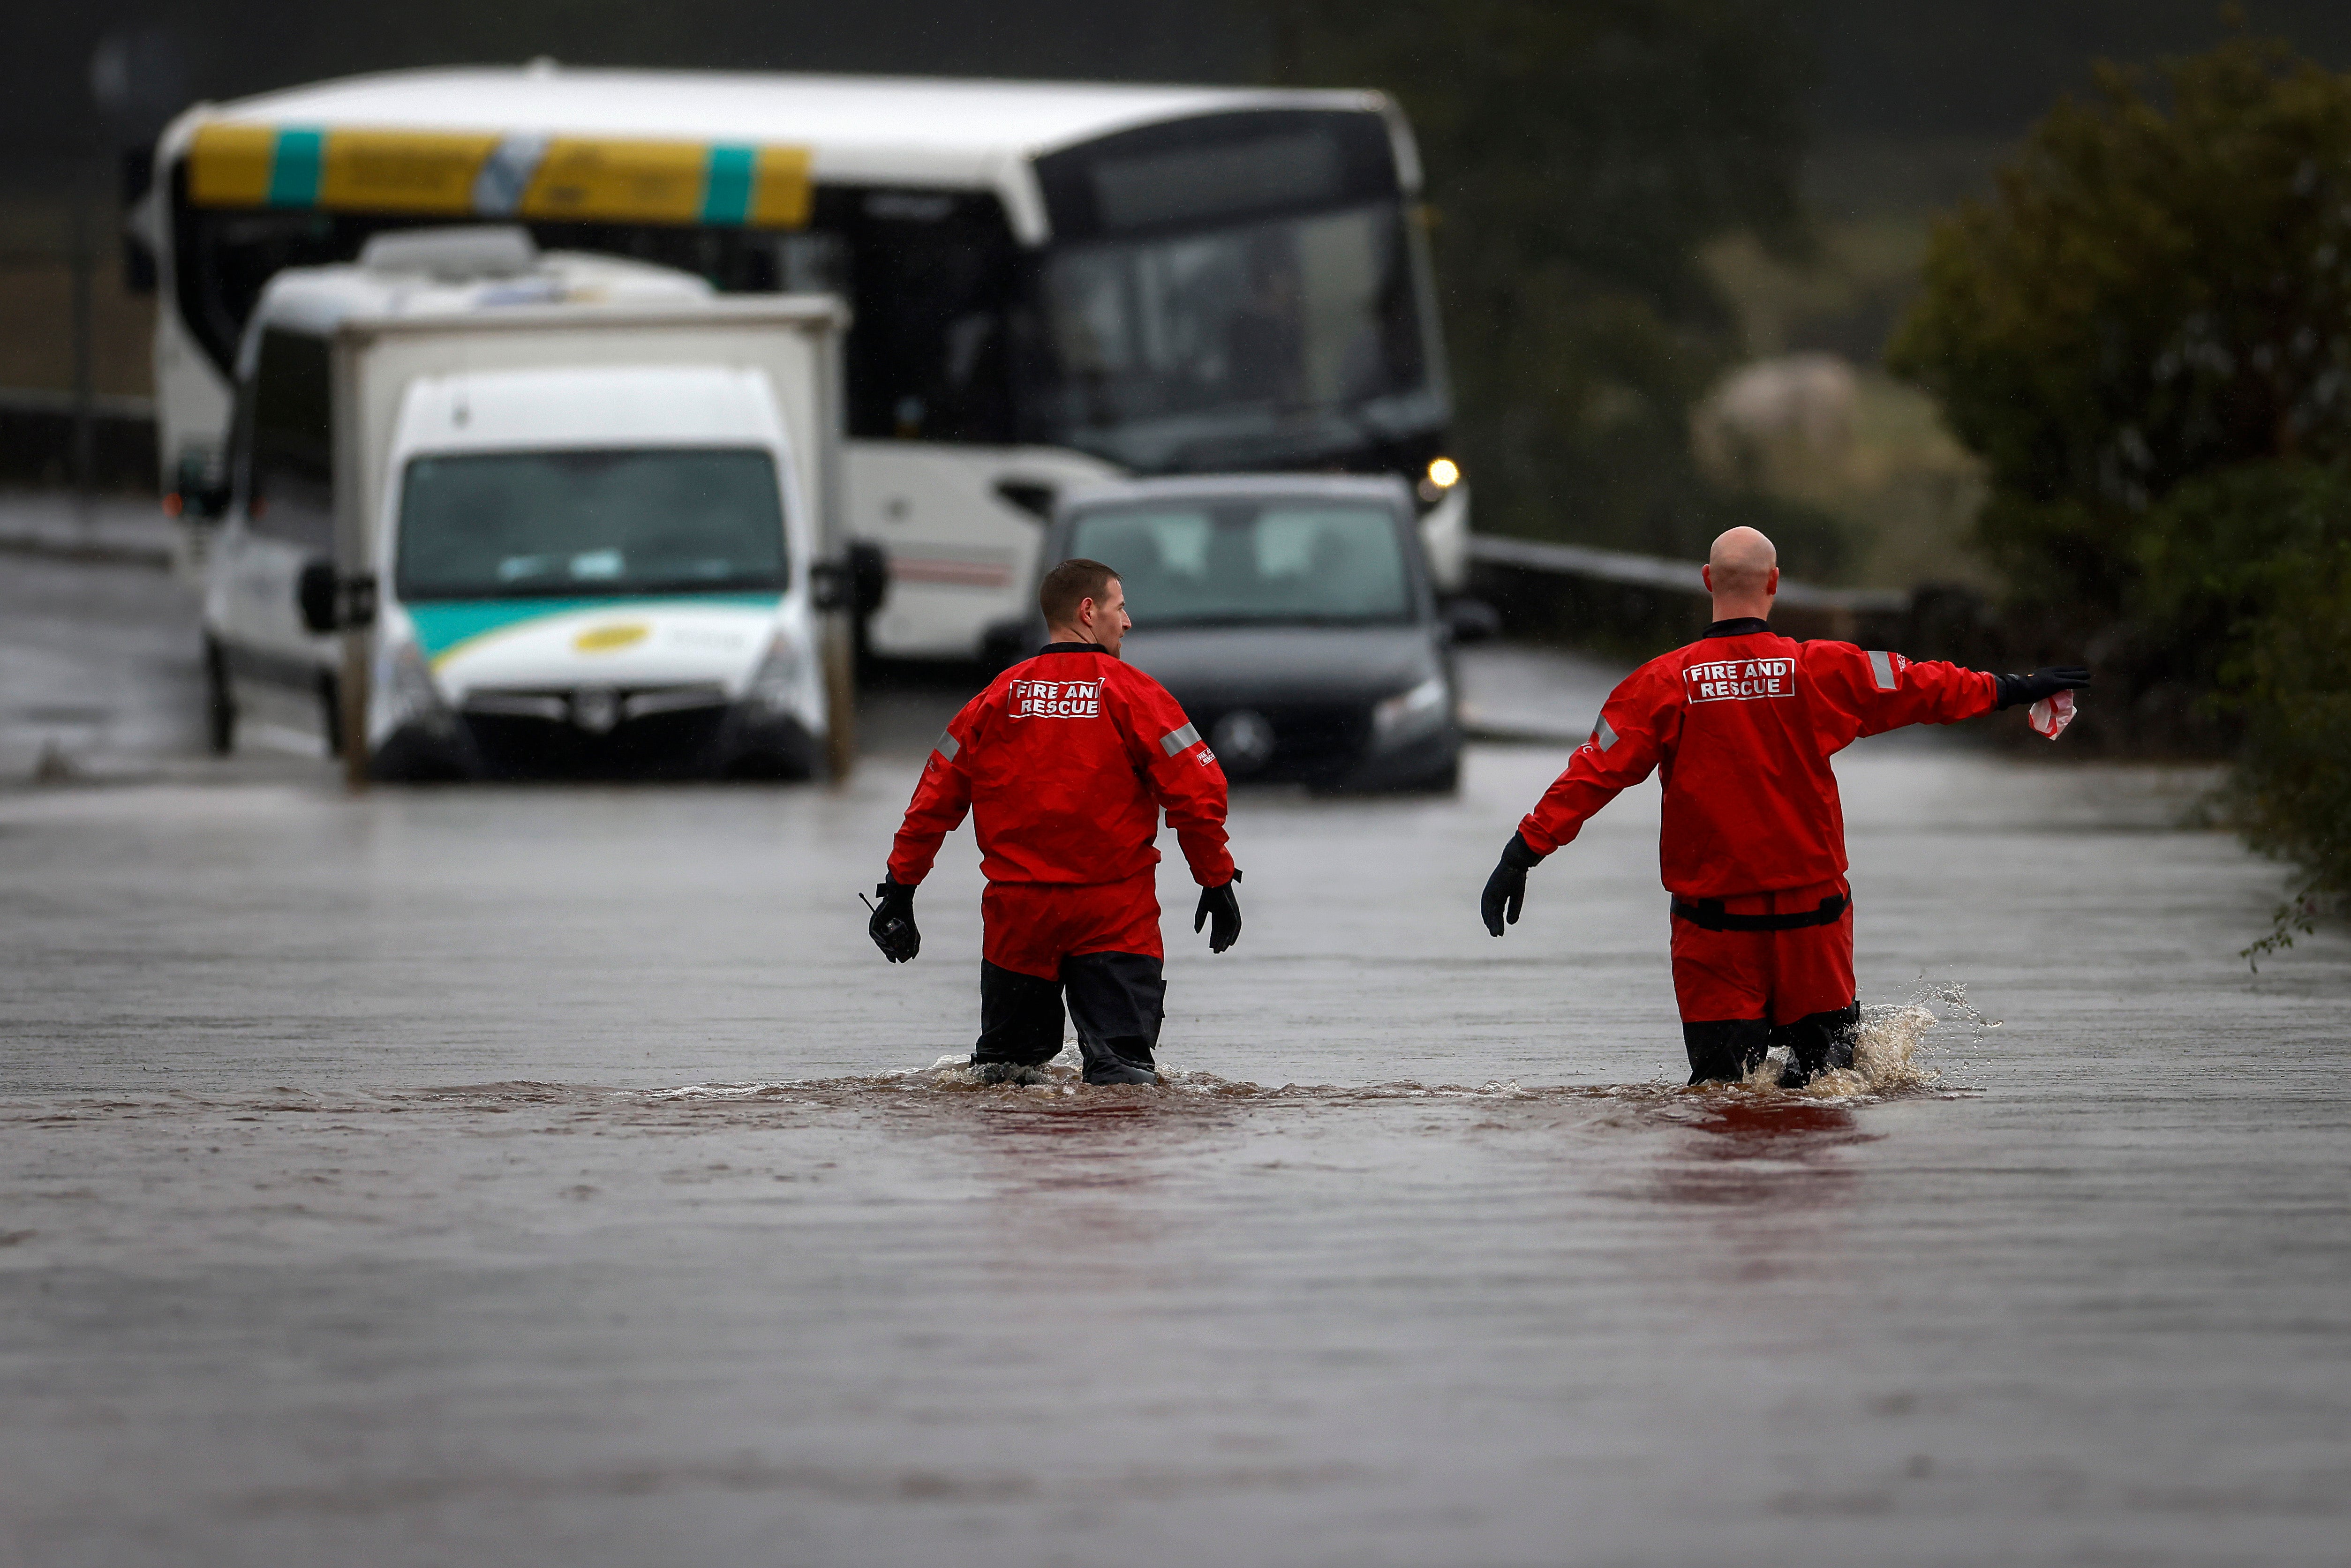 Members of the public struggle with flooding in Drymen, Scotland, after amber weather warnings were issued across much of the country.